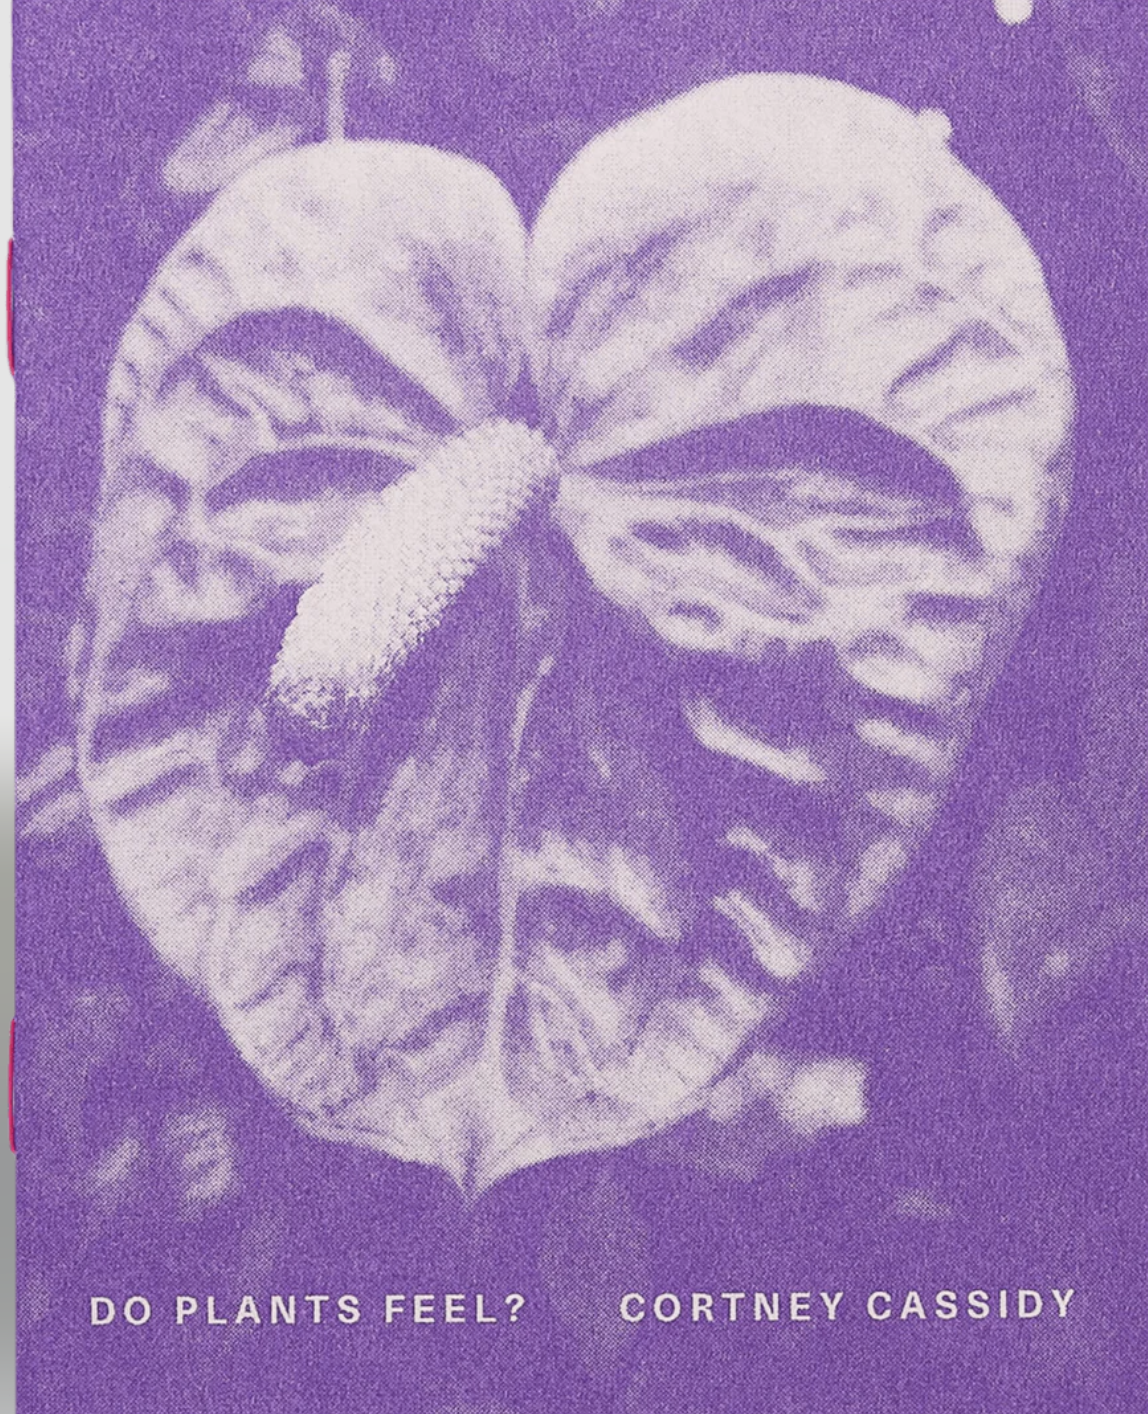 monochrome photograph of a flower with text that reads do plants feel printed in purple ink